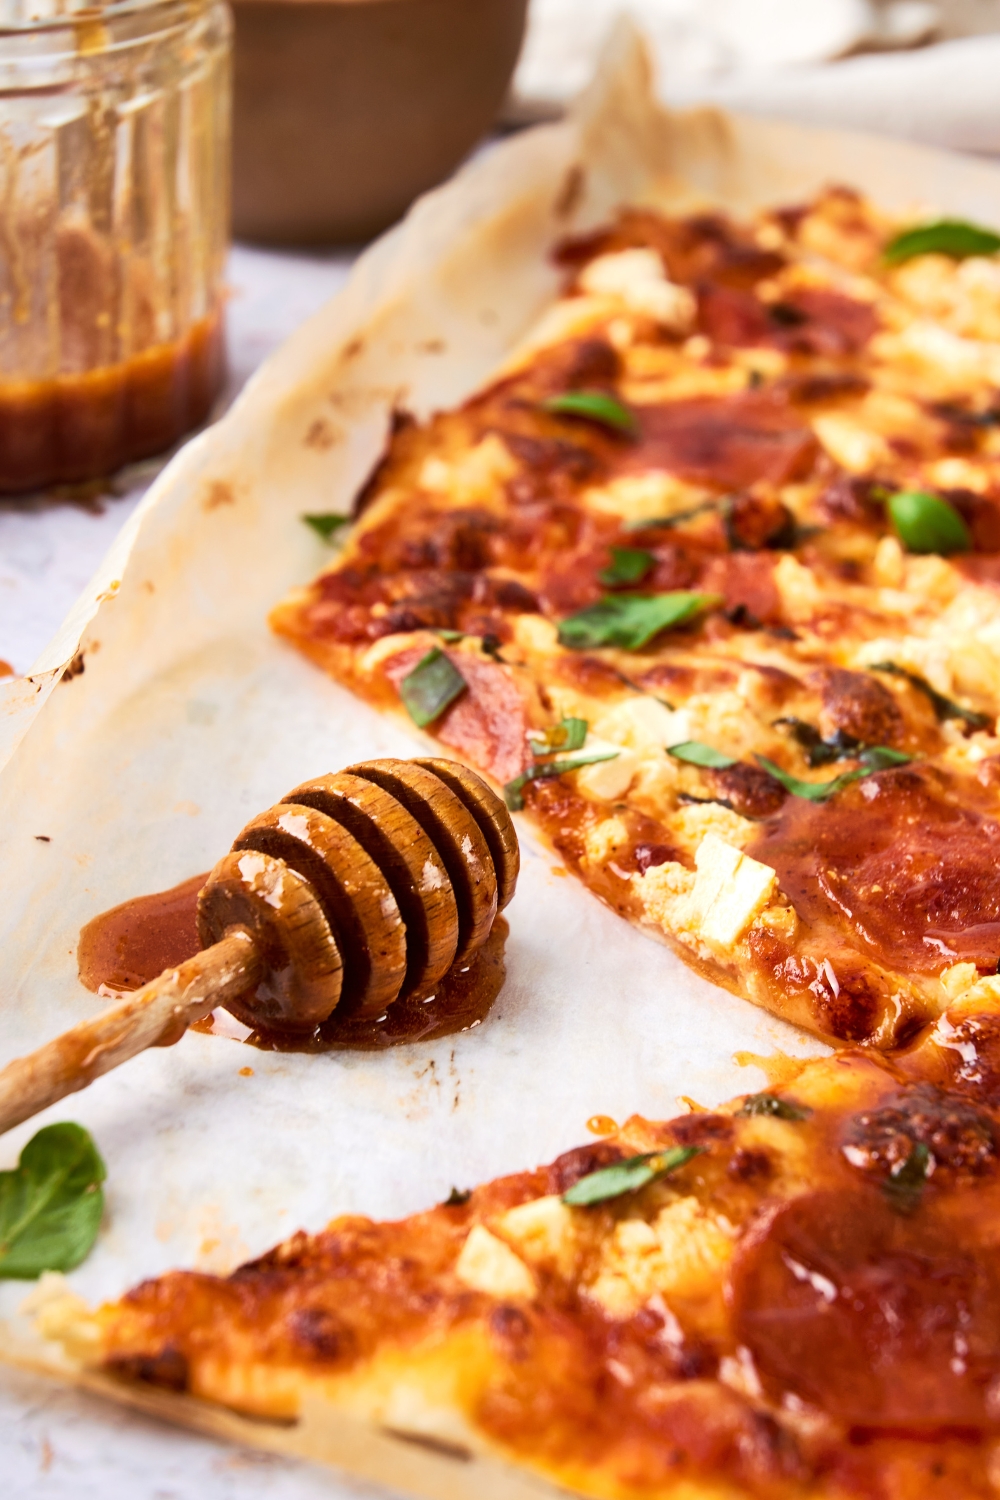 A honey dipper is resting on a parchment paper next to a cooked hot honey pizza.